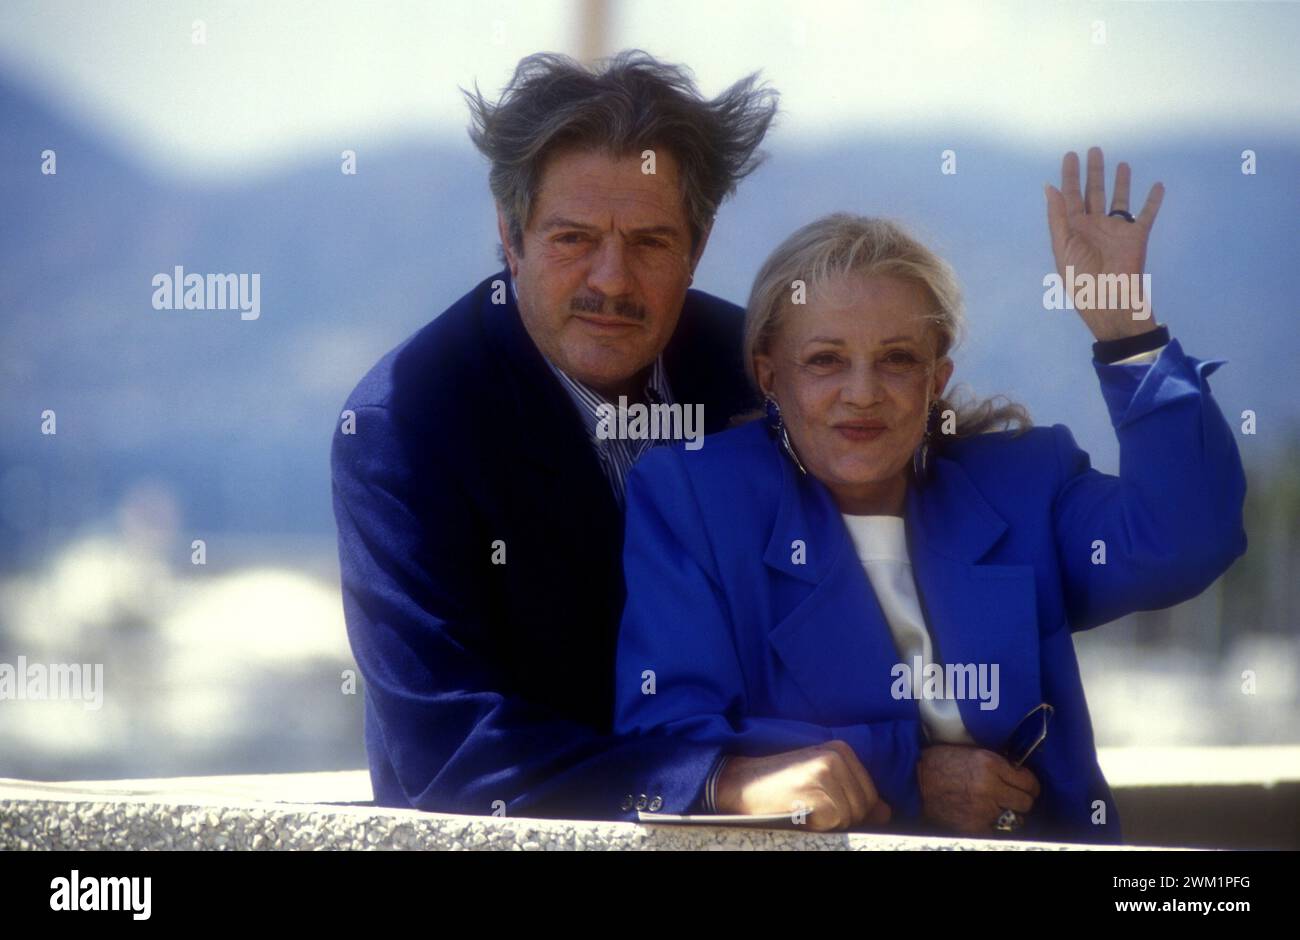 MME4703449 Comedians Marcello Mastroianni and Jeanne Moreau at the Cannes Film Festival in 1991.; (add.info.: Comedians Marcello Mastroianni and Jeanne Moreau at the Cannes Film Festival in 1991.); © Marcello Mencarini. All rights reserved 2023. Stock Photo